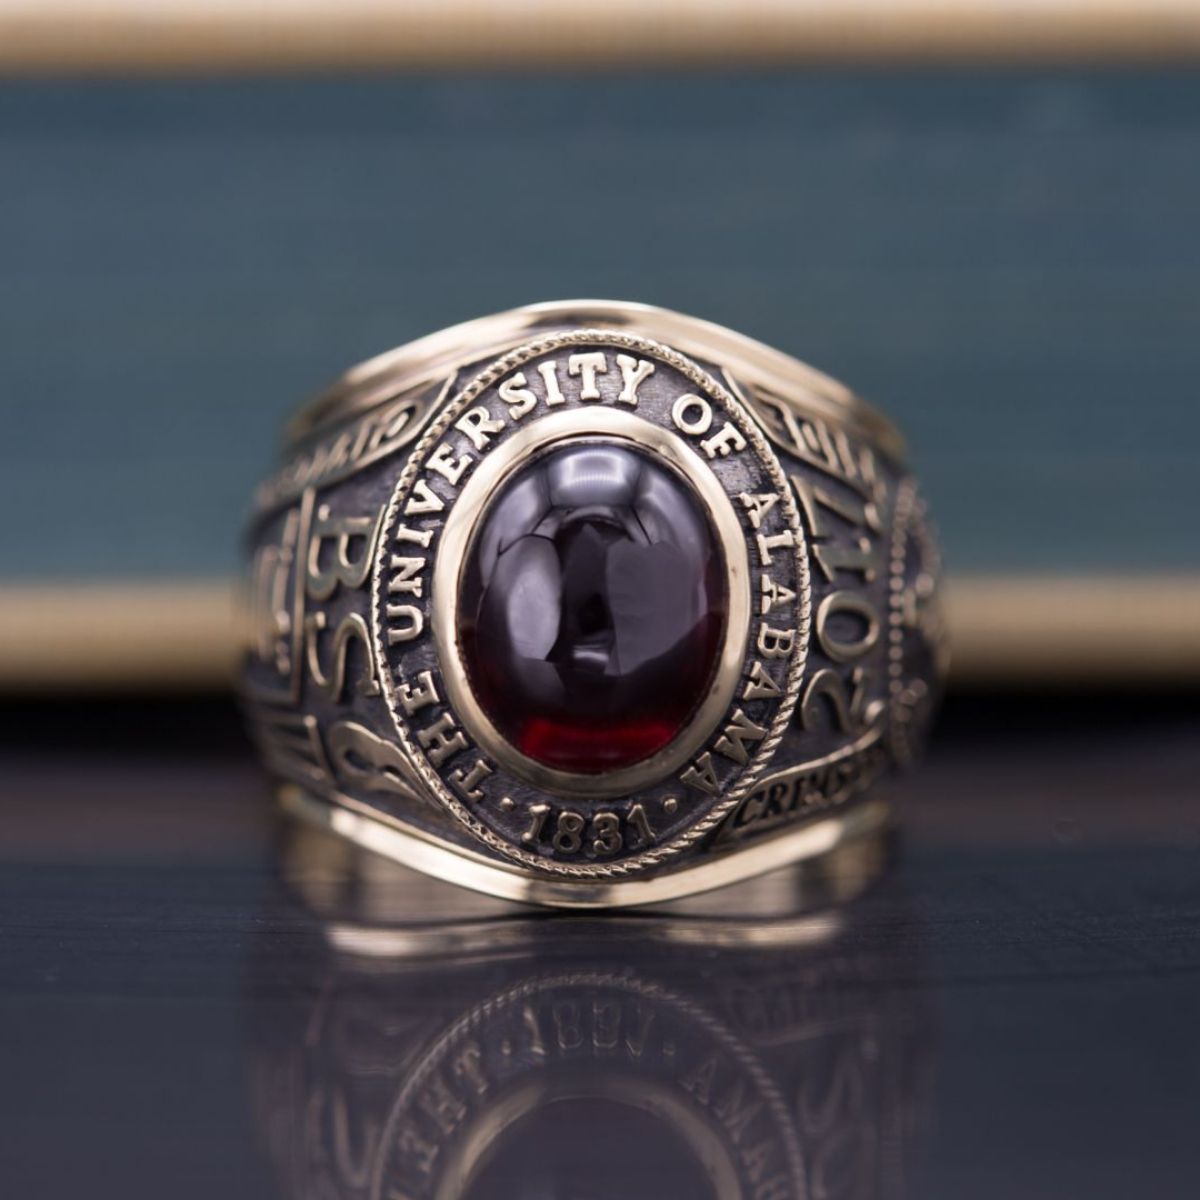 Custom Class Rings | Design Your Own College Class Ring | CustomMade.com